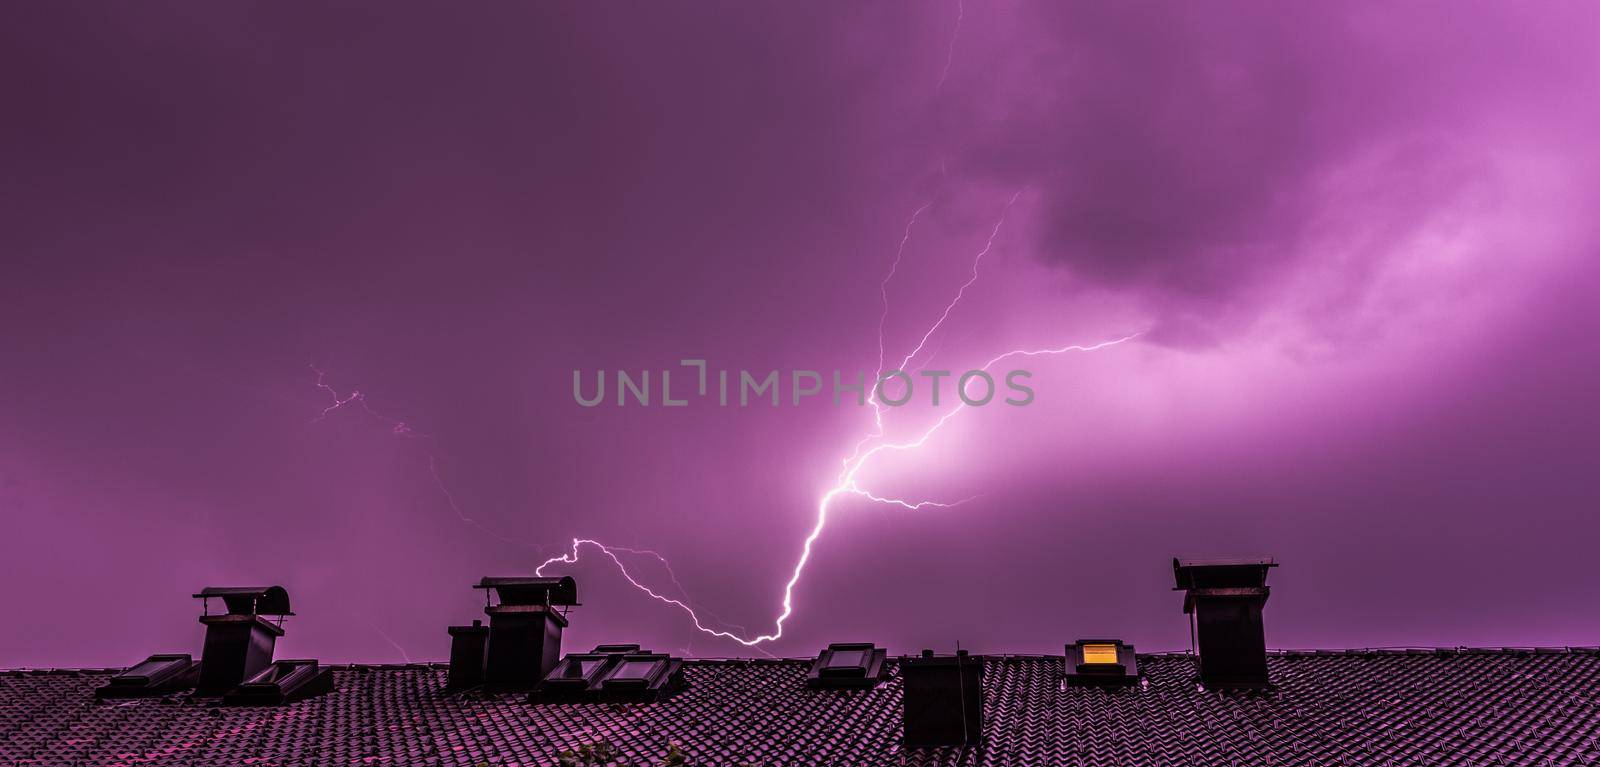 Thunderstorm in the night: Lightning over a roof of a building by Daxenbichler